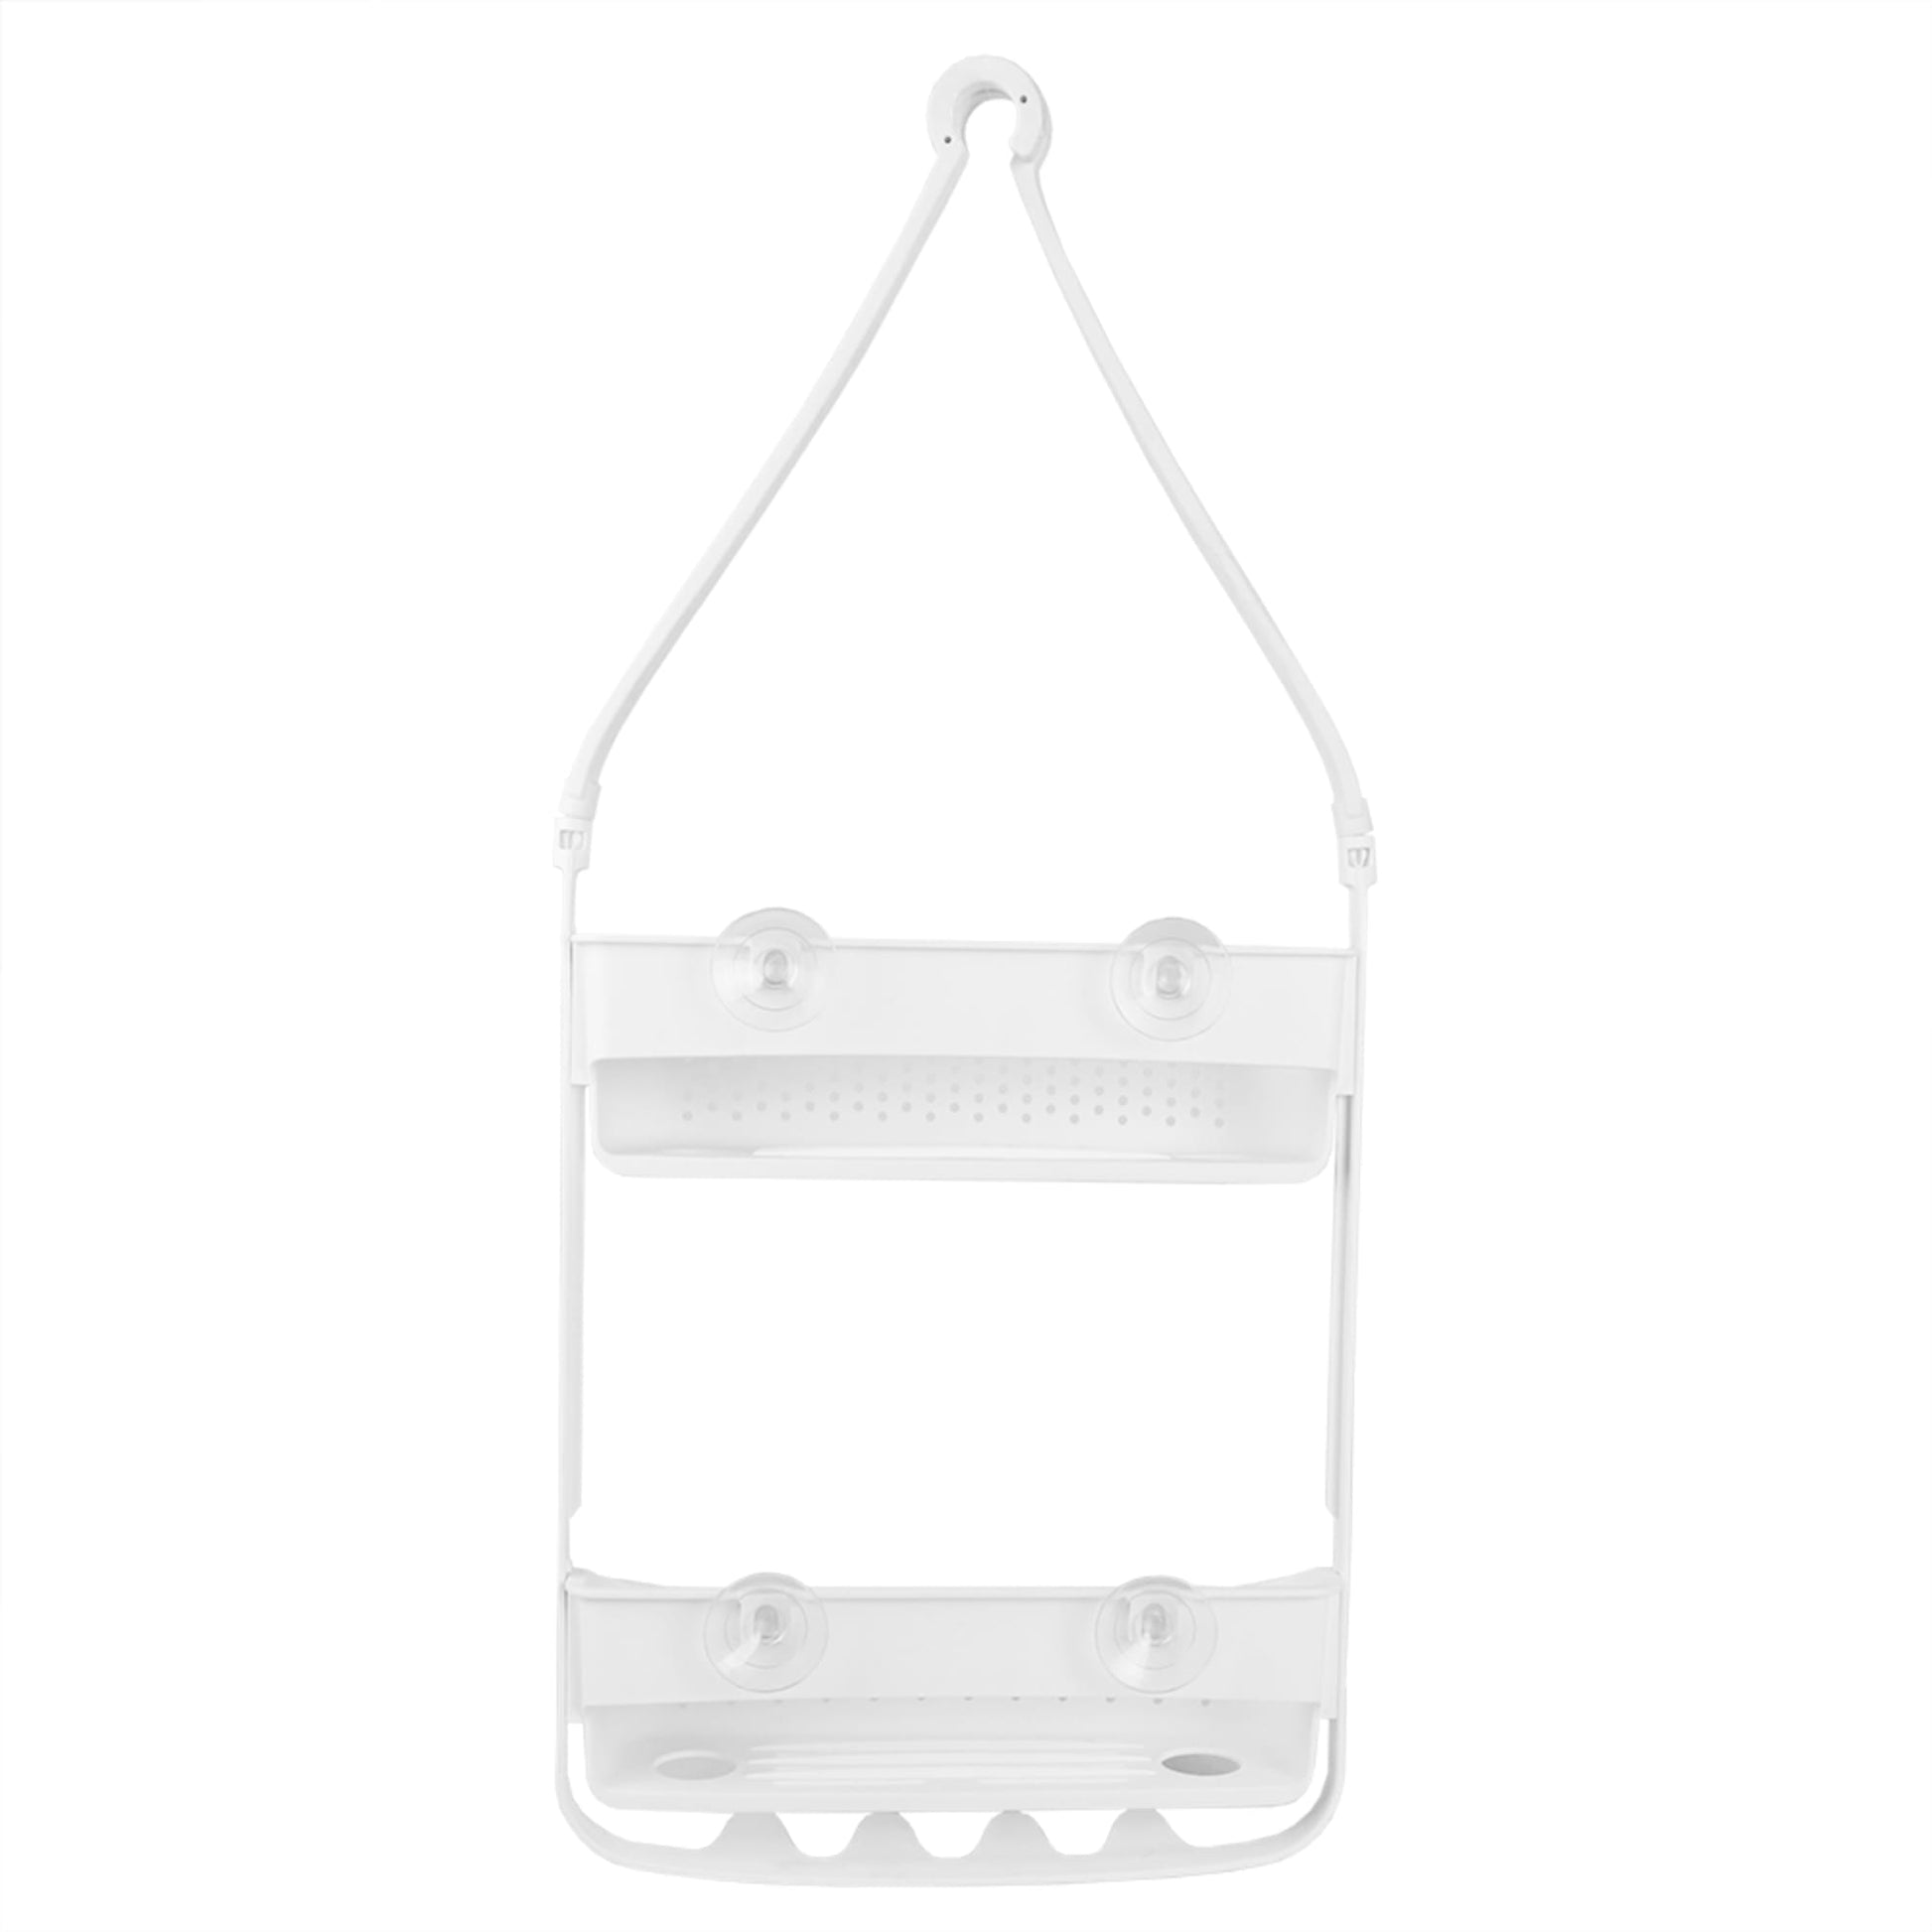 2 Tier Perforated Plastic Shower Caddy with Suction Cups, White, SHOWER